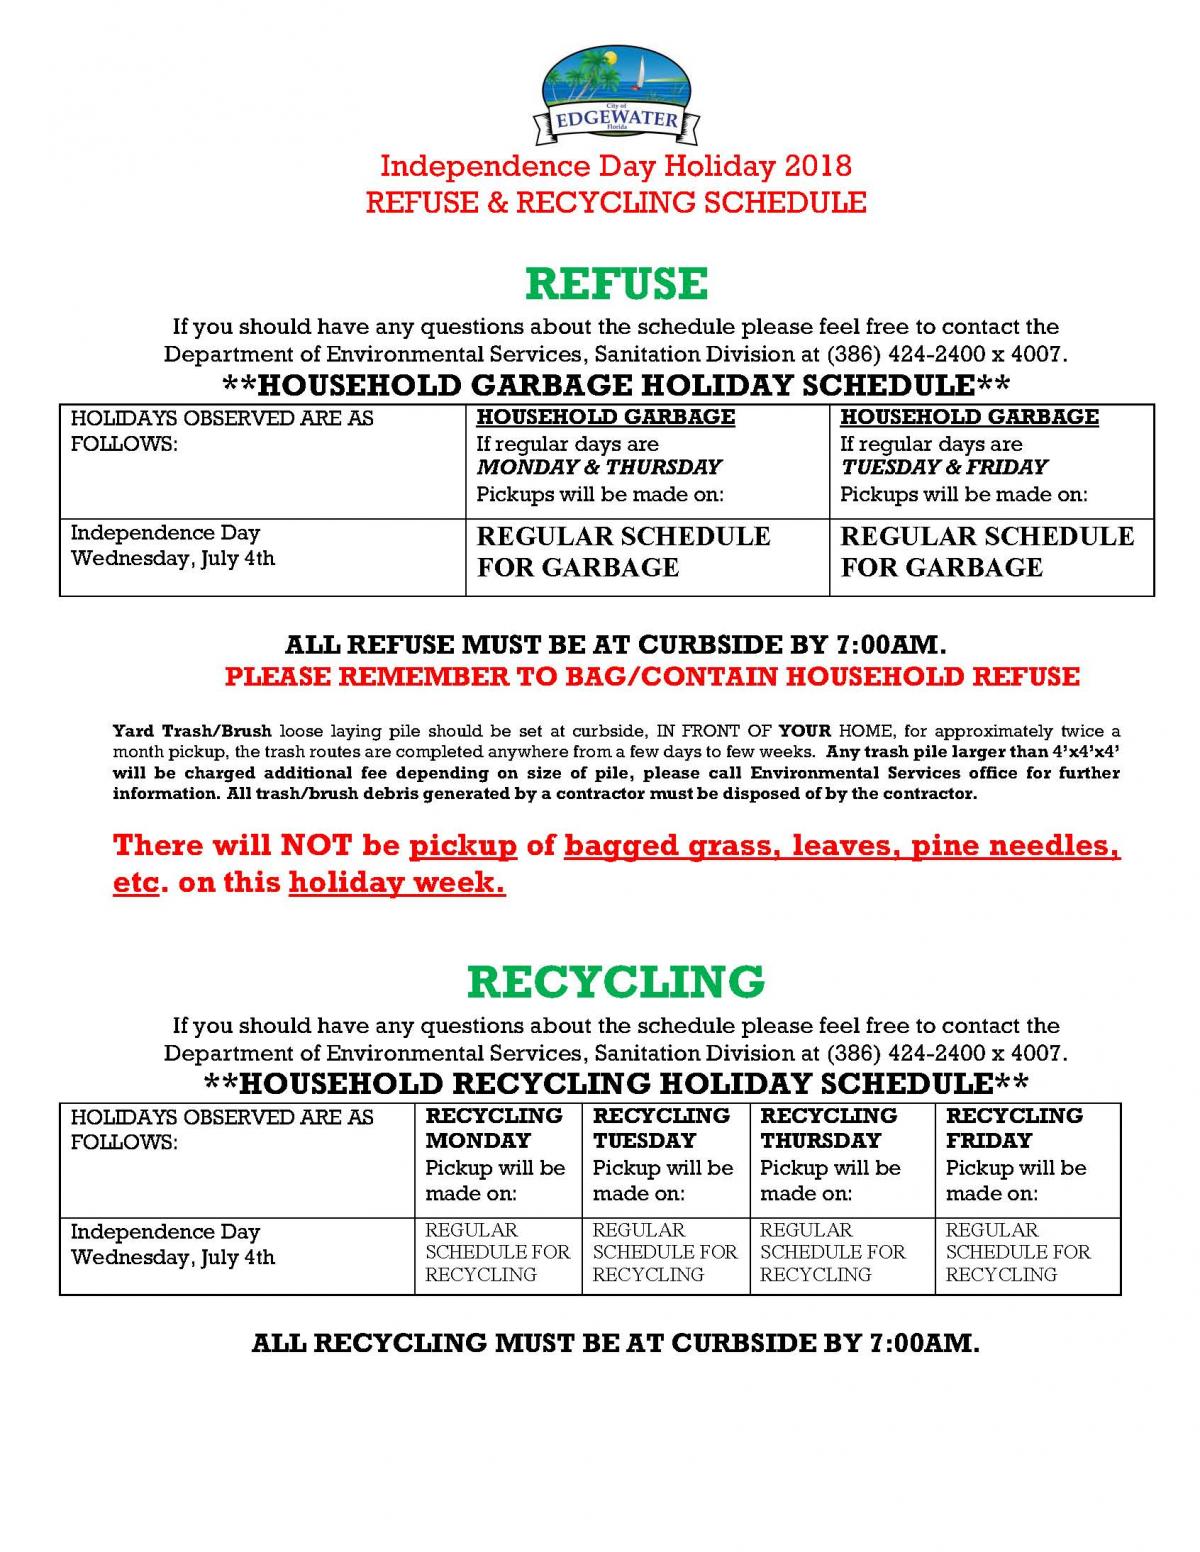 Refuse & Recycling Holiday Schedule-Independence Day | City of